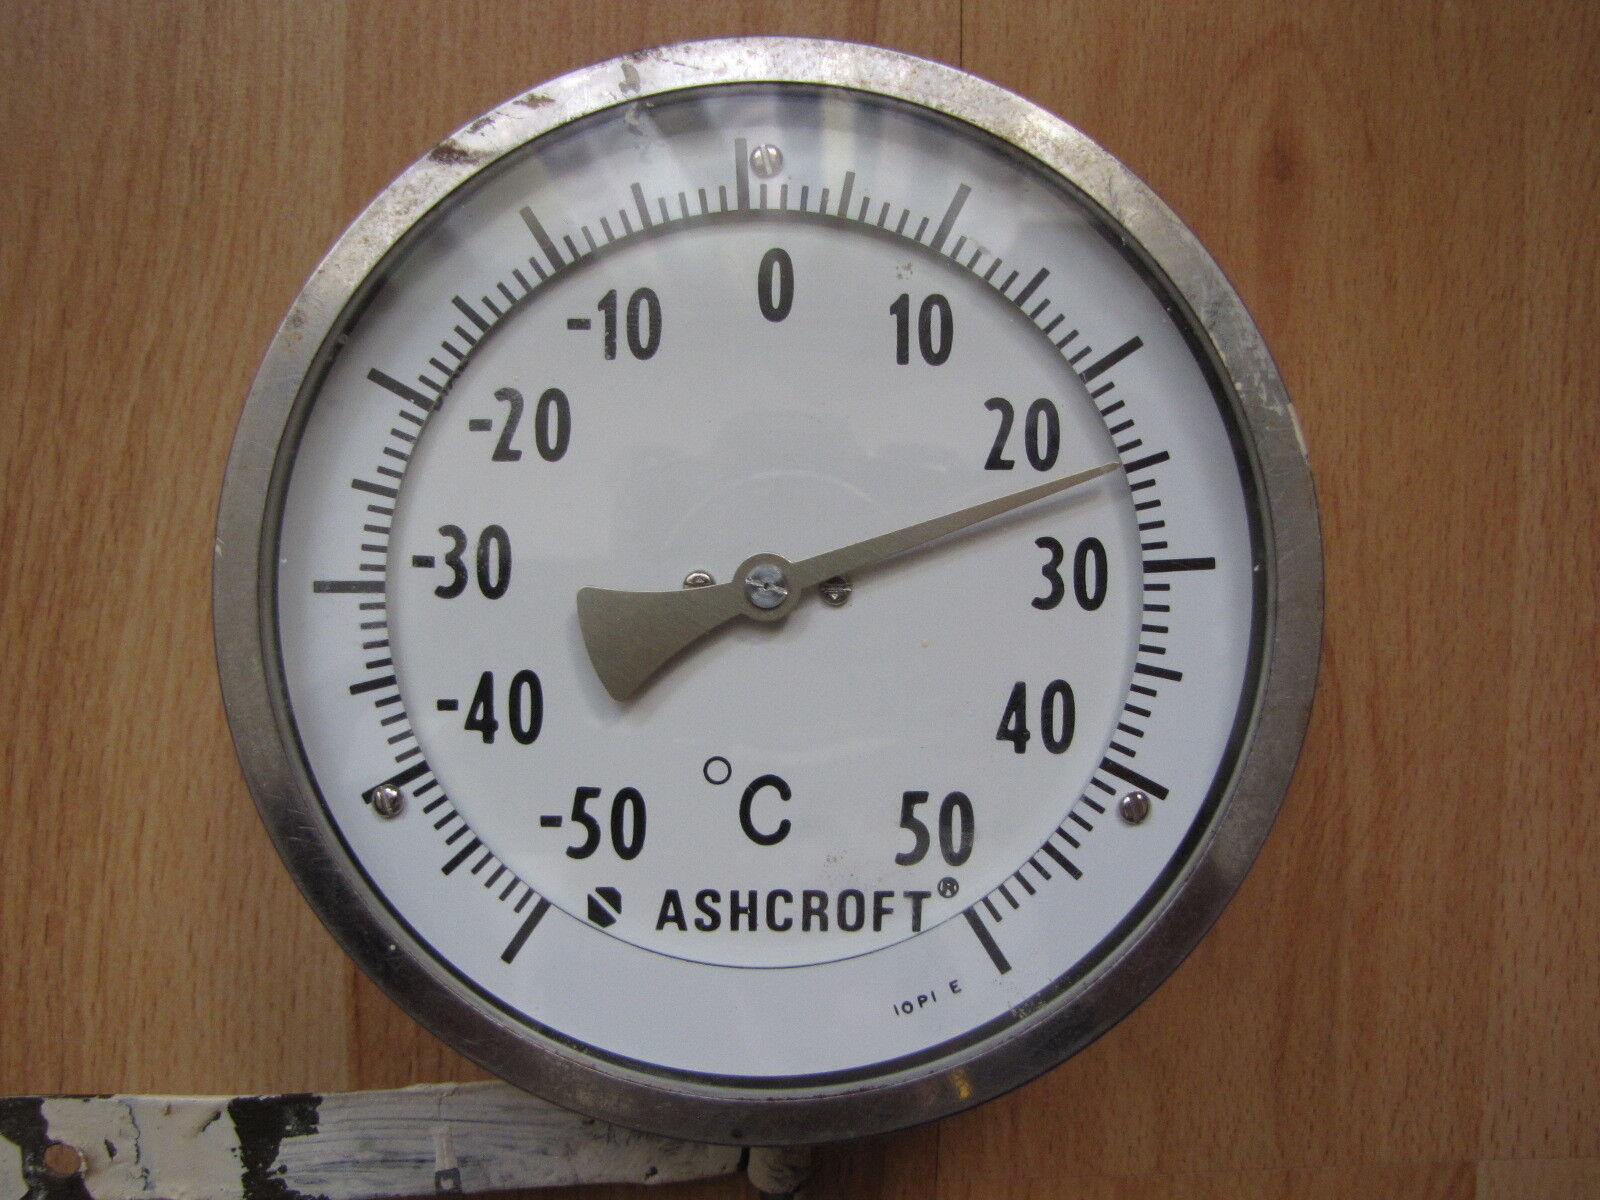 Ashcroft Germany  -/+ 50 C Temperature Meter Gauge Thermometer Patent No 2925734